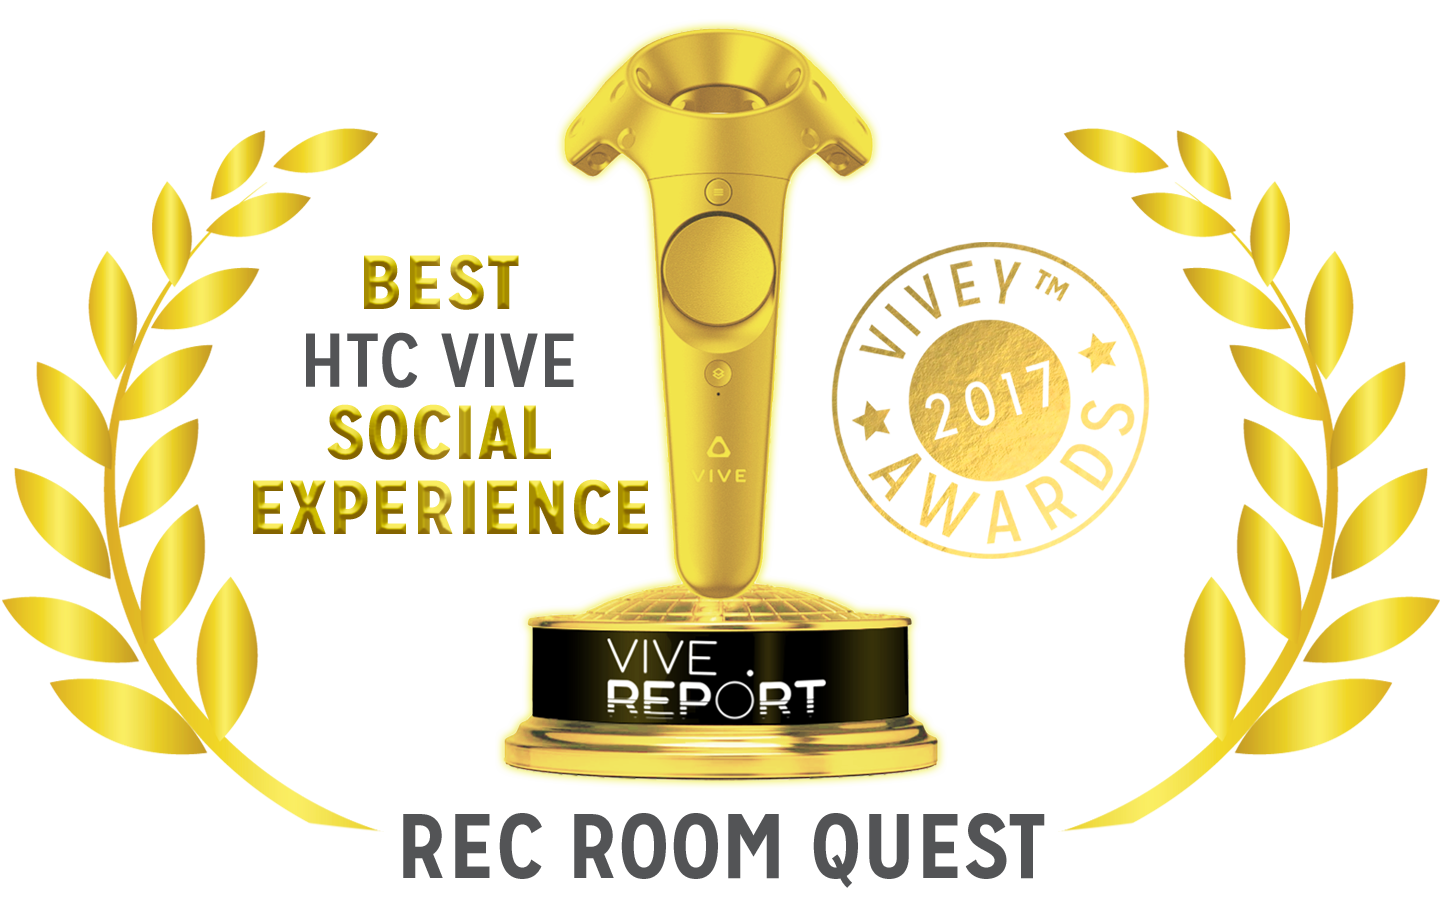 Best Social Experience Trophy